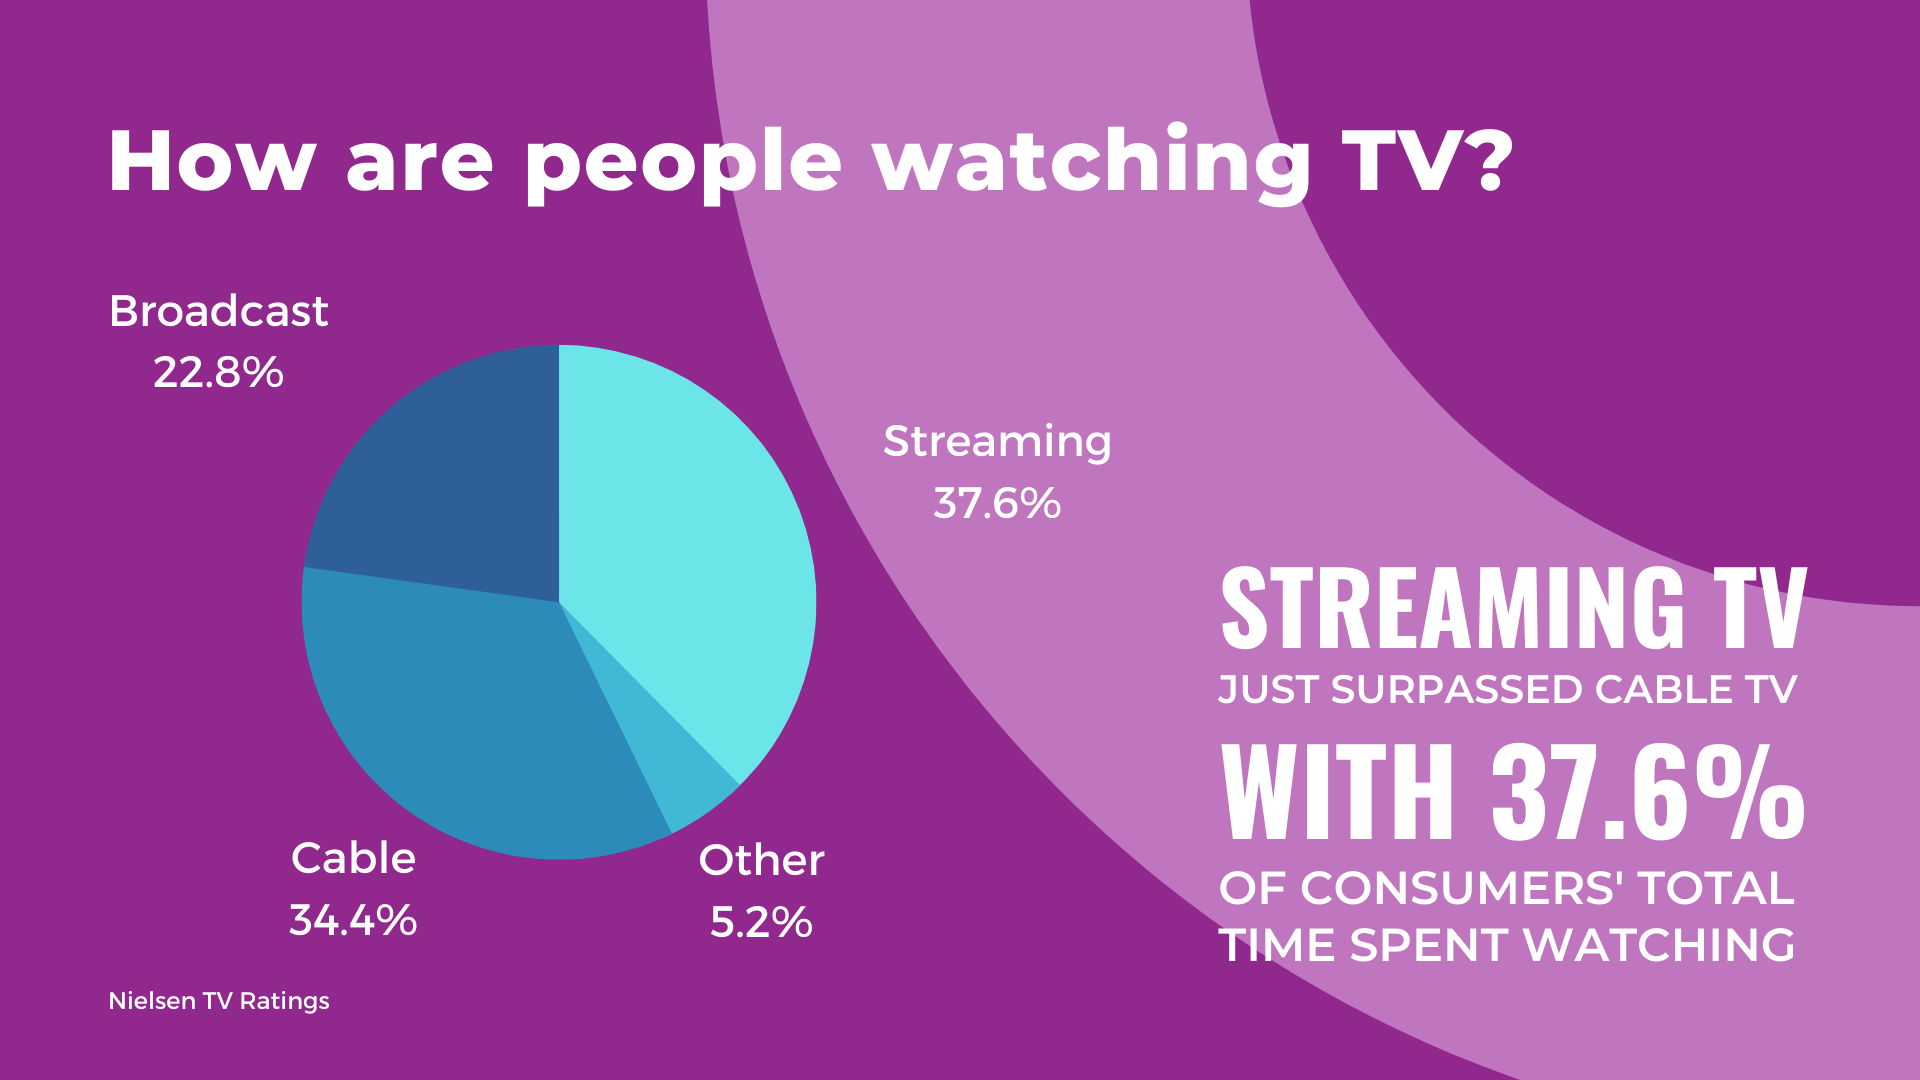 Streaming TV on vacation: What cord-cutters need to know